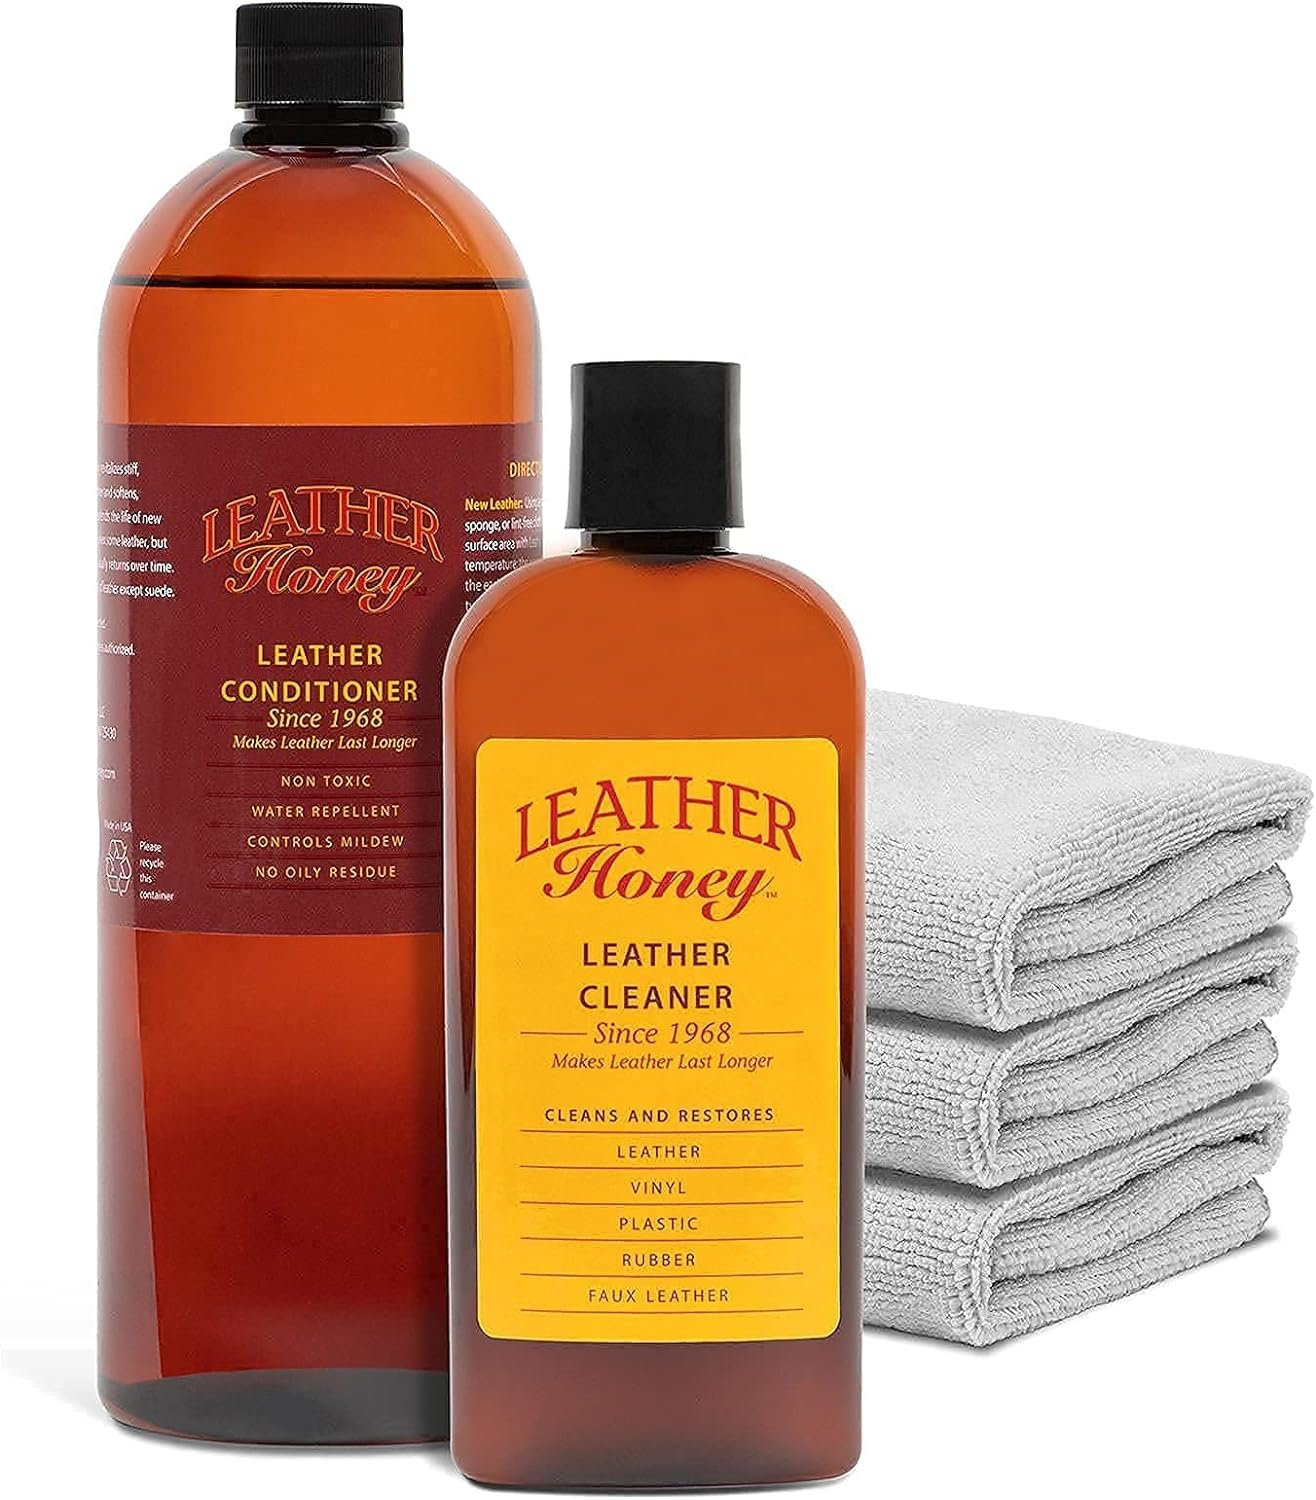 Leather Honey Complete Leather Care Kit Review